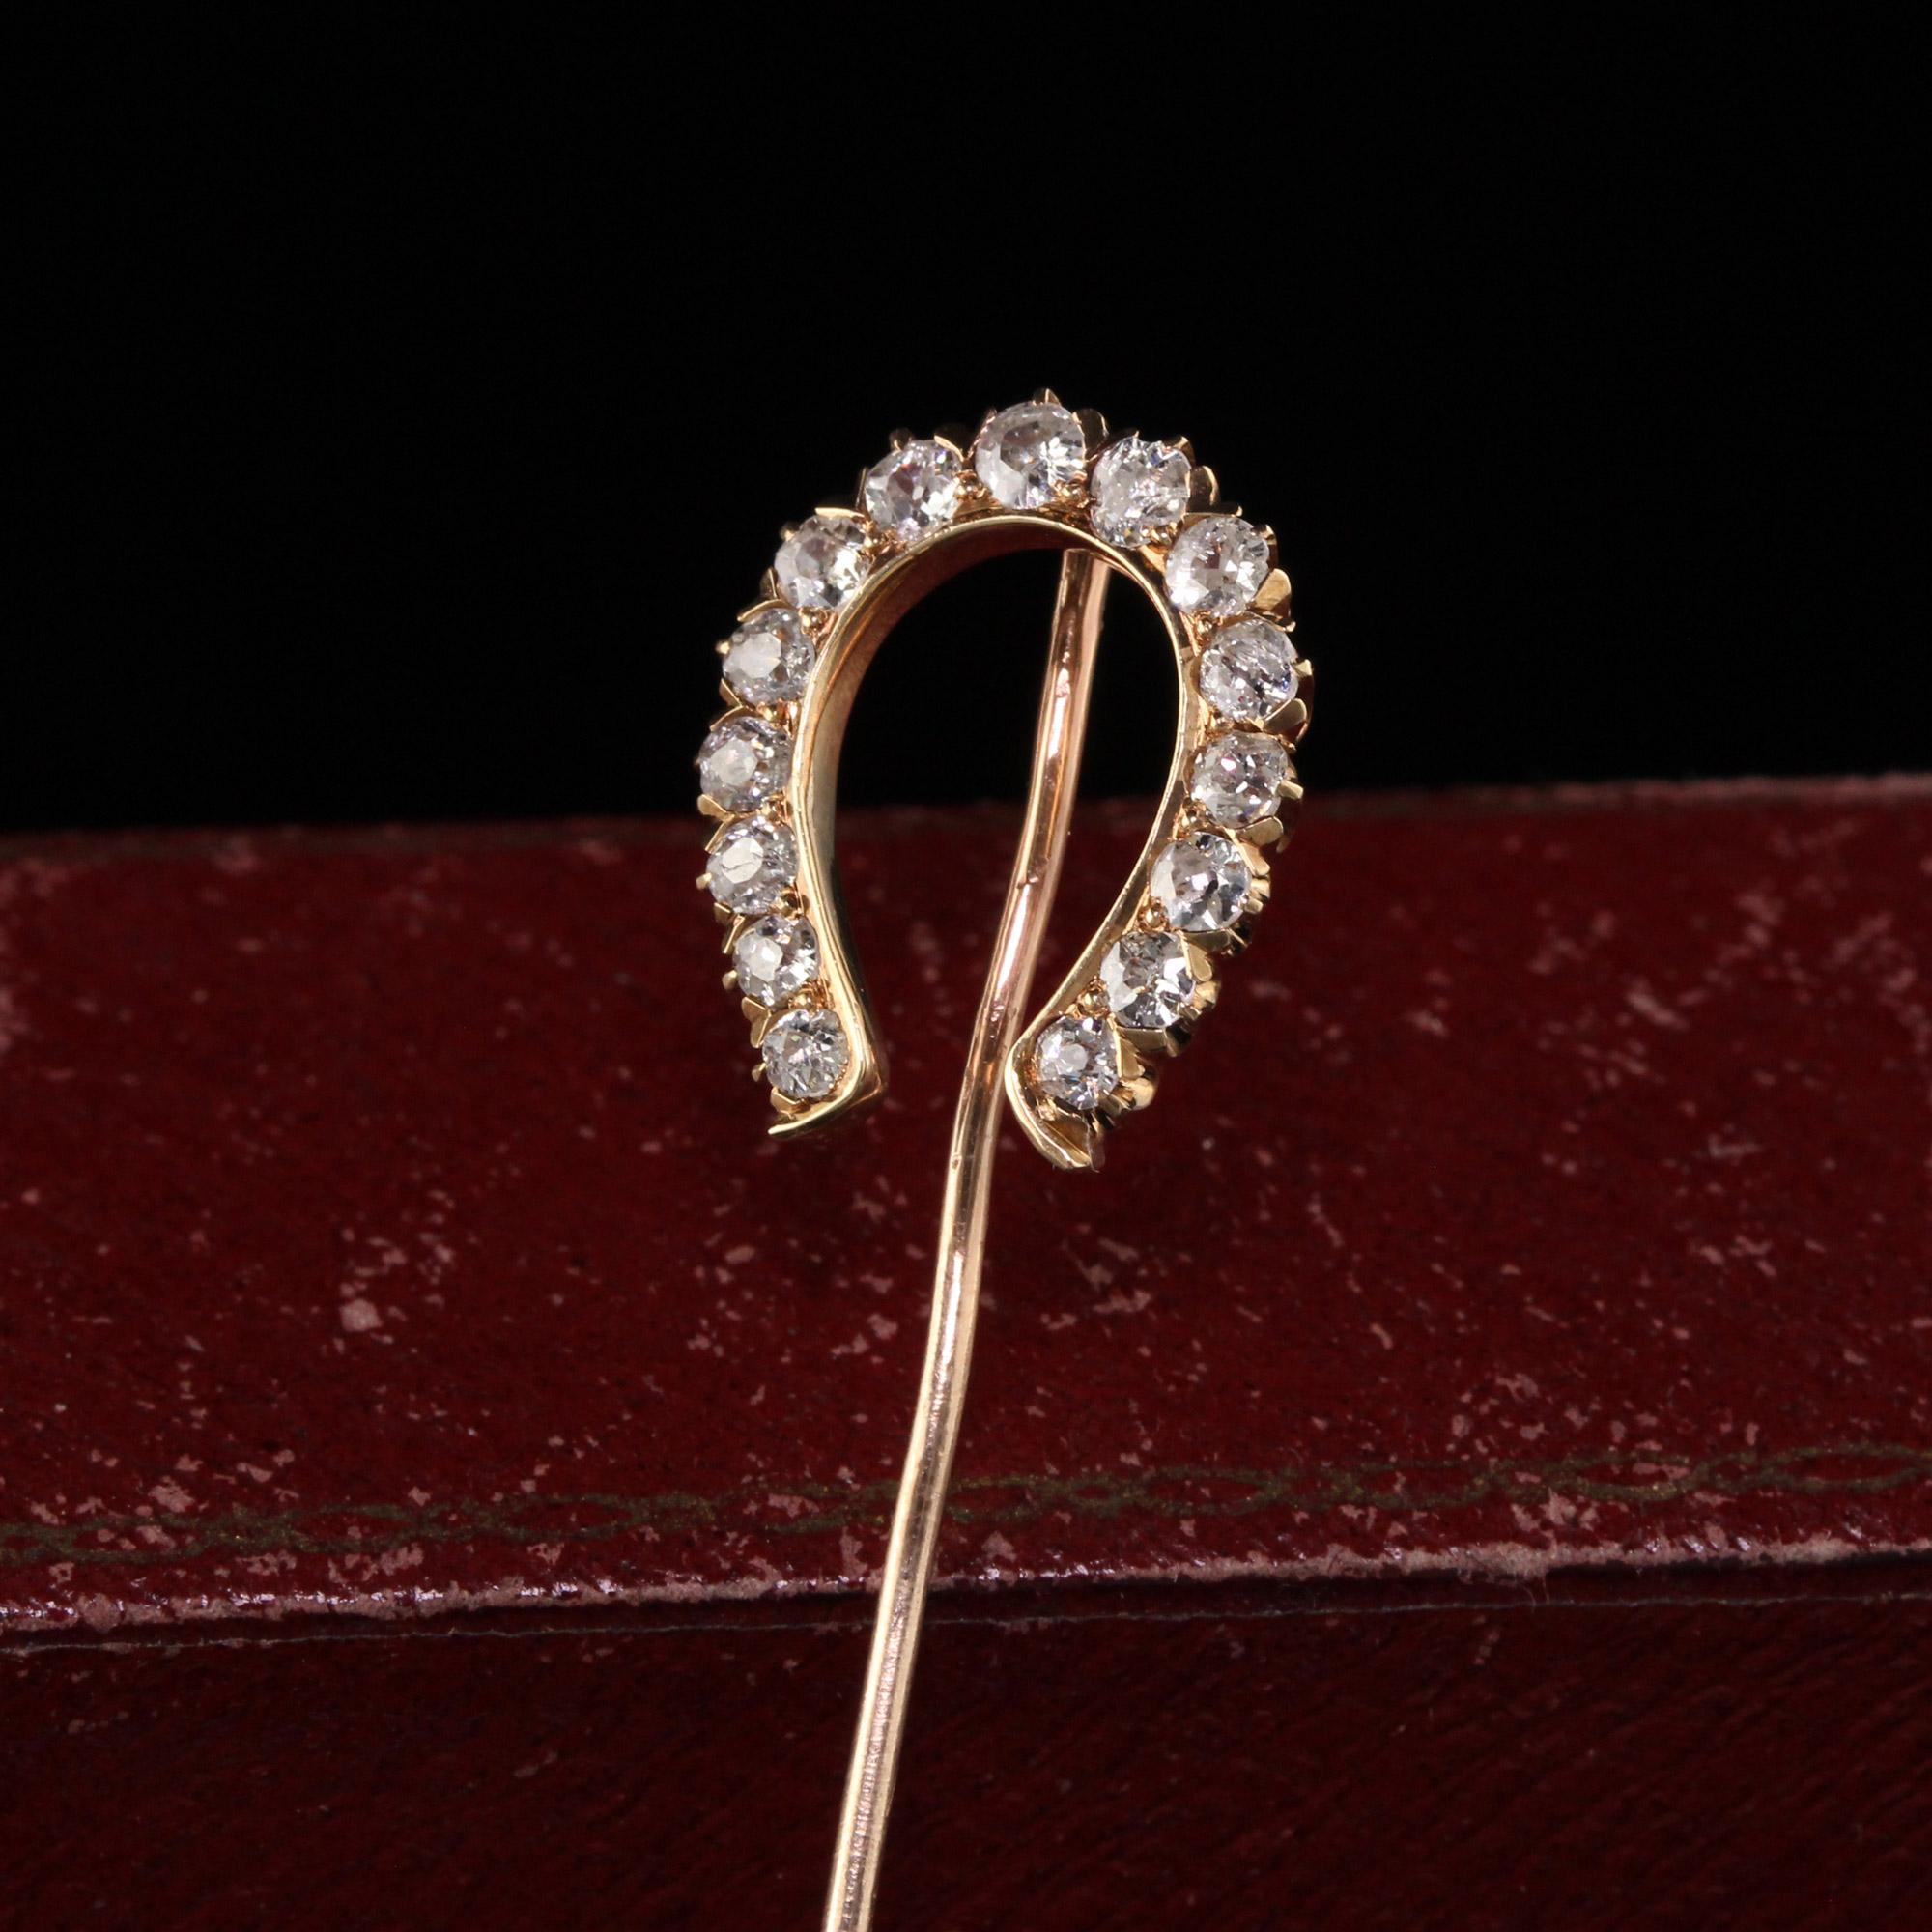 Beautiful Antique Victorian 14K Rose Gold Old Mine Diamond Horseshoe Stick Pin. This pin has old mine cut diamonds set in rose gold in the shape of a horseshoe. It can be worn as a stickpin or even converted to a pendant.

Item #P0110

Metal: 14K